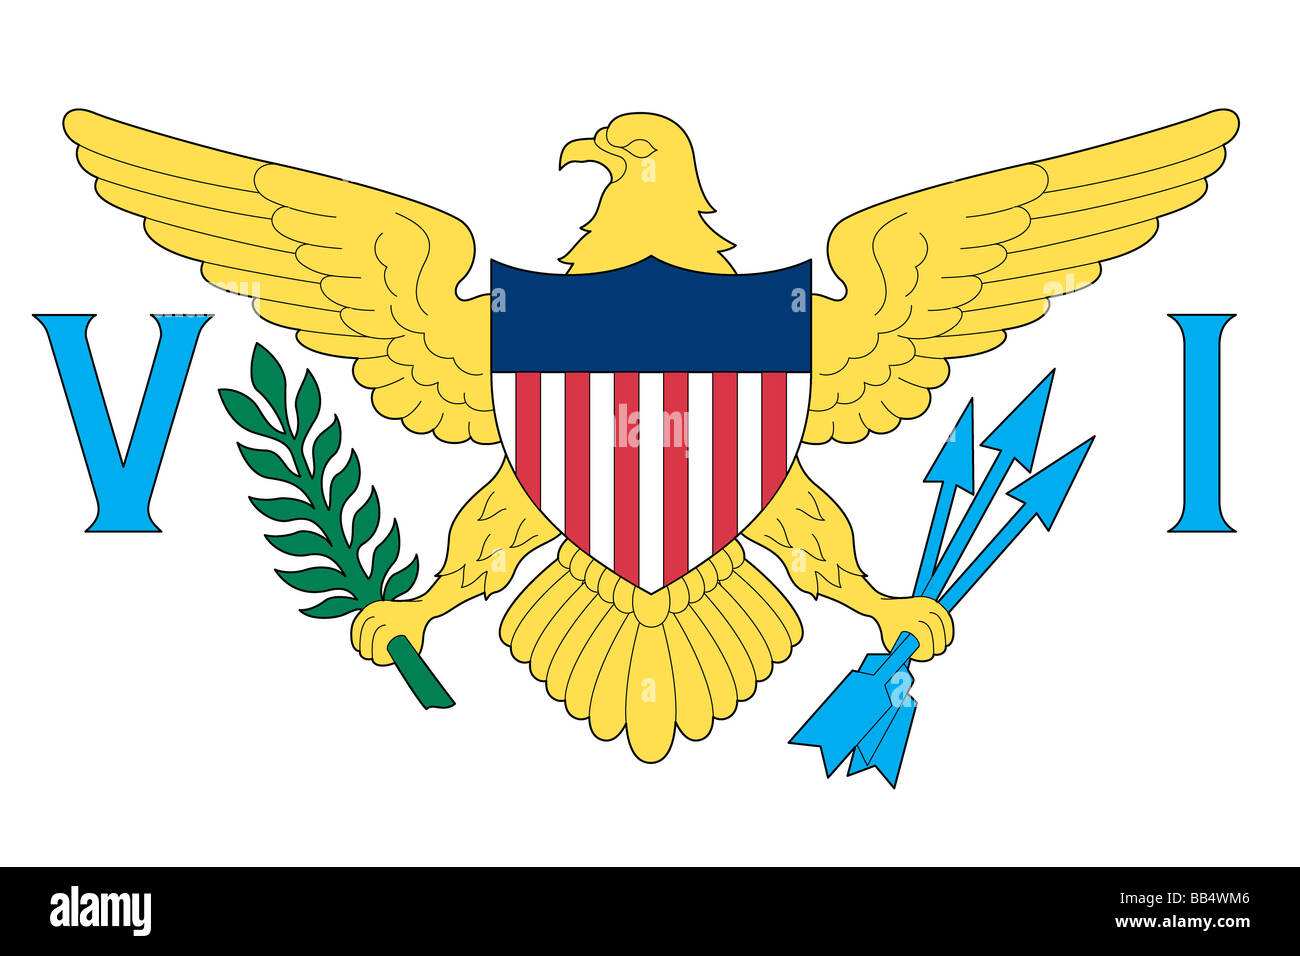 Flag of the U.S. Virgin Islands, an unincorporated island territory of the United States located in the Caribbean Sea. Stock Photo